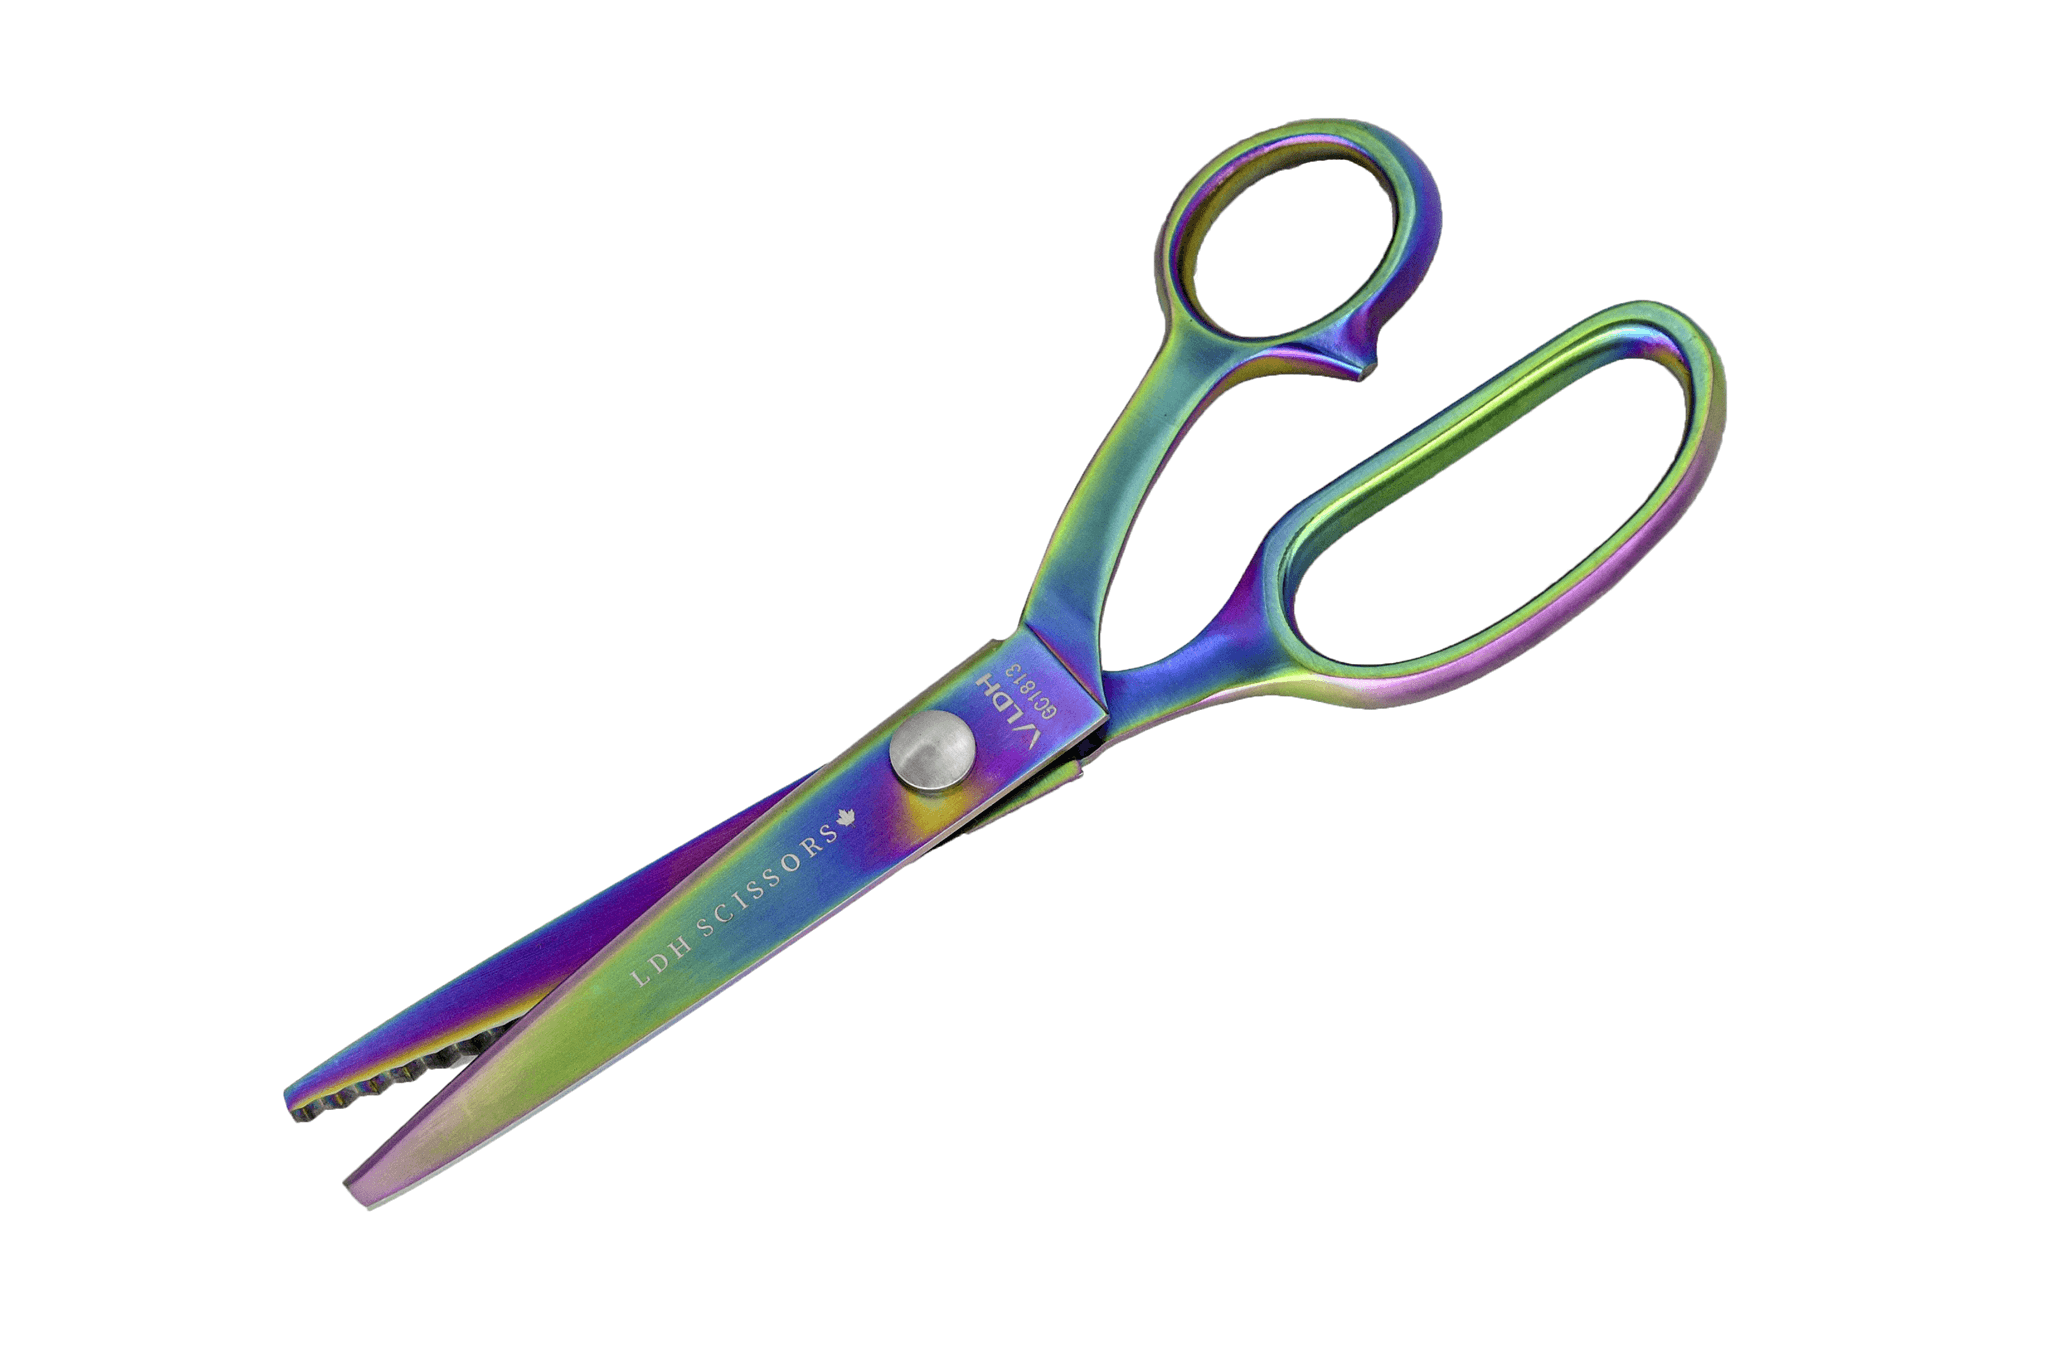 I Asked 3 Pros How to Sharpen Fabric & Pinking Scissors